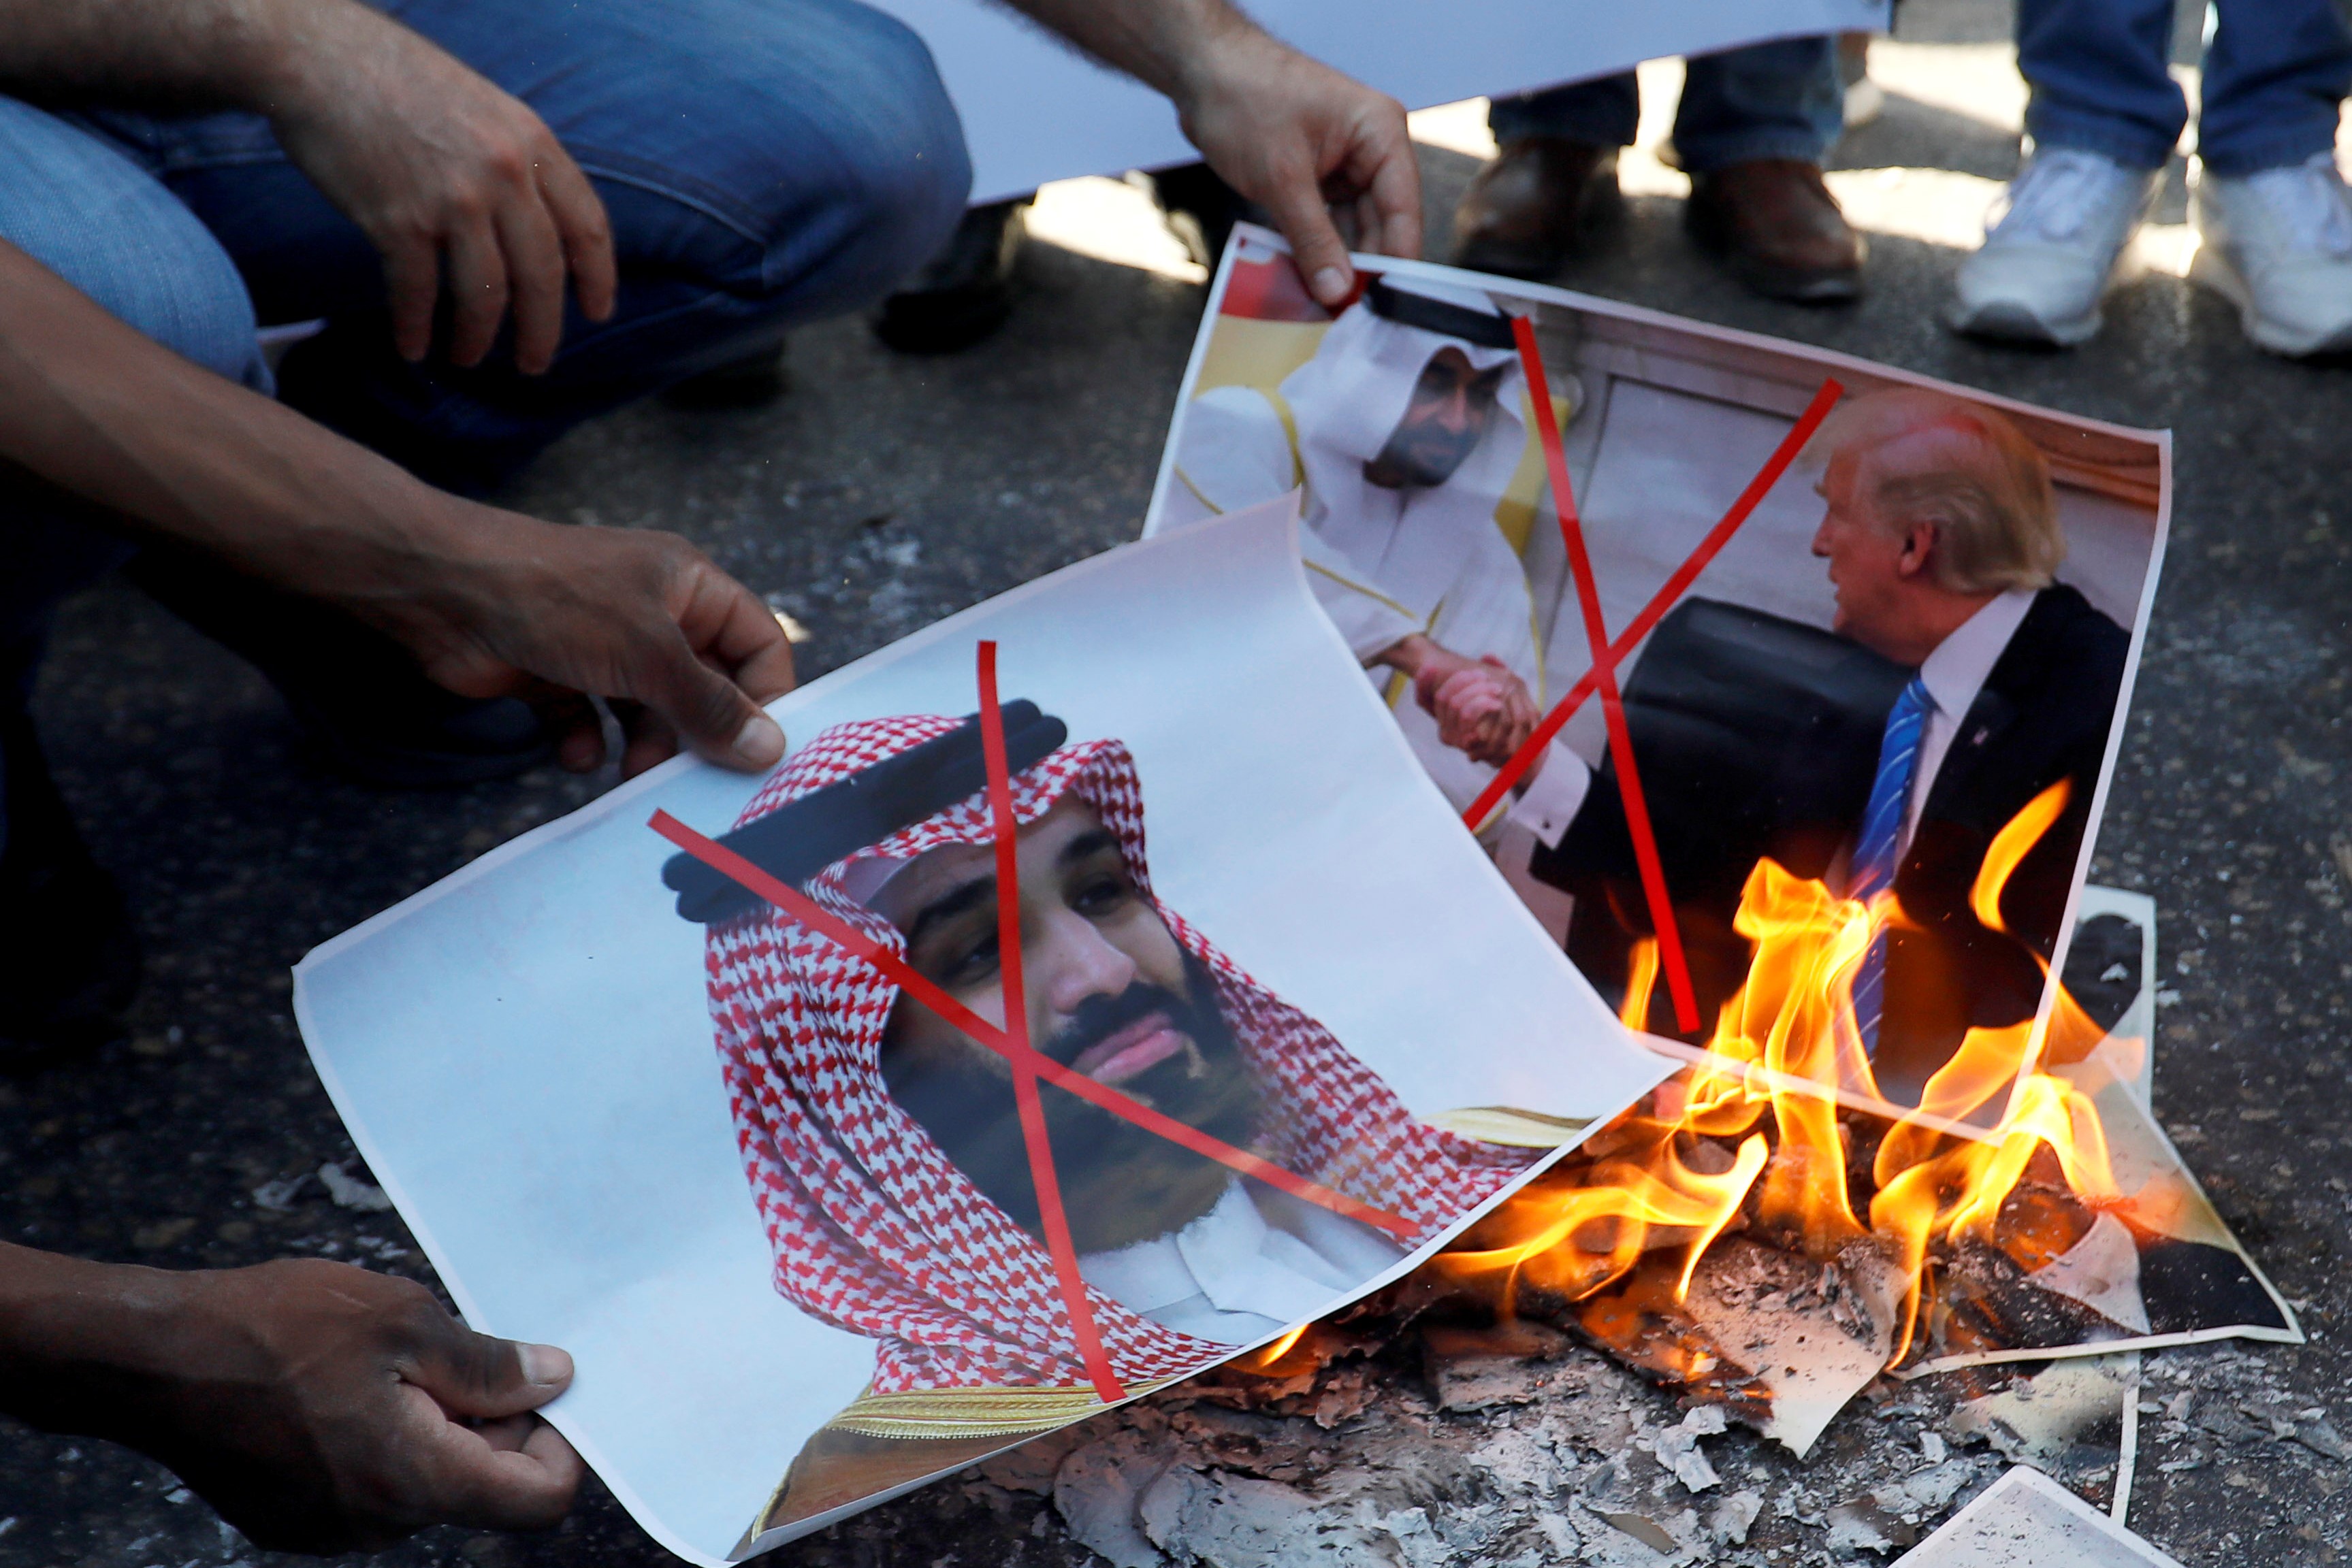   Palestinians burn pictures depicting US President, Abu Dhabi Crown Prince and Saudi Arabia's Crown Prince during a protest against the UAE deal with Israel in Ramallah on 15 August (Reuters)